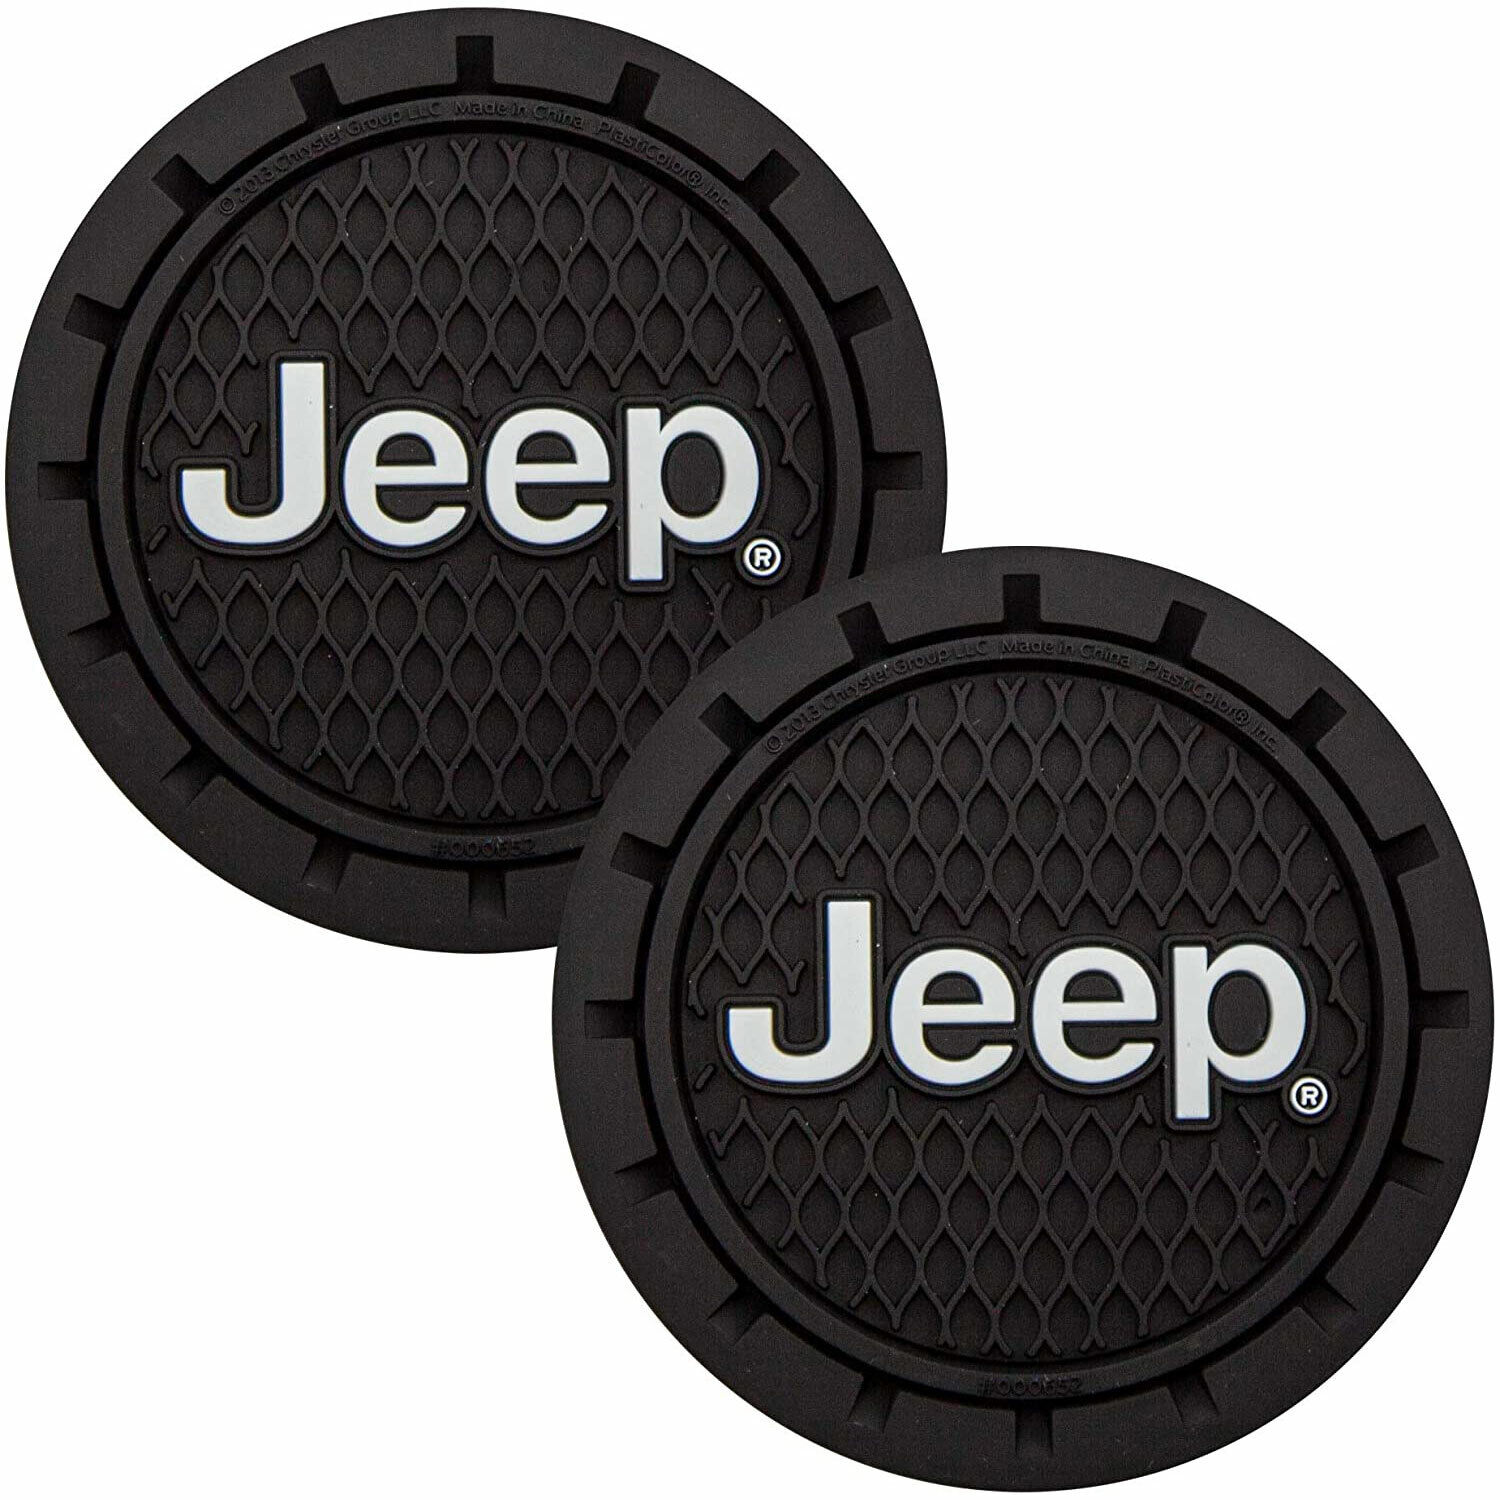 Plasticolor Jeep Car Coaster, 2x Cupholder Coasters with the Jeep Logo